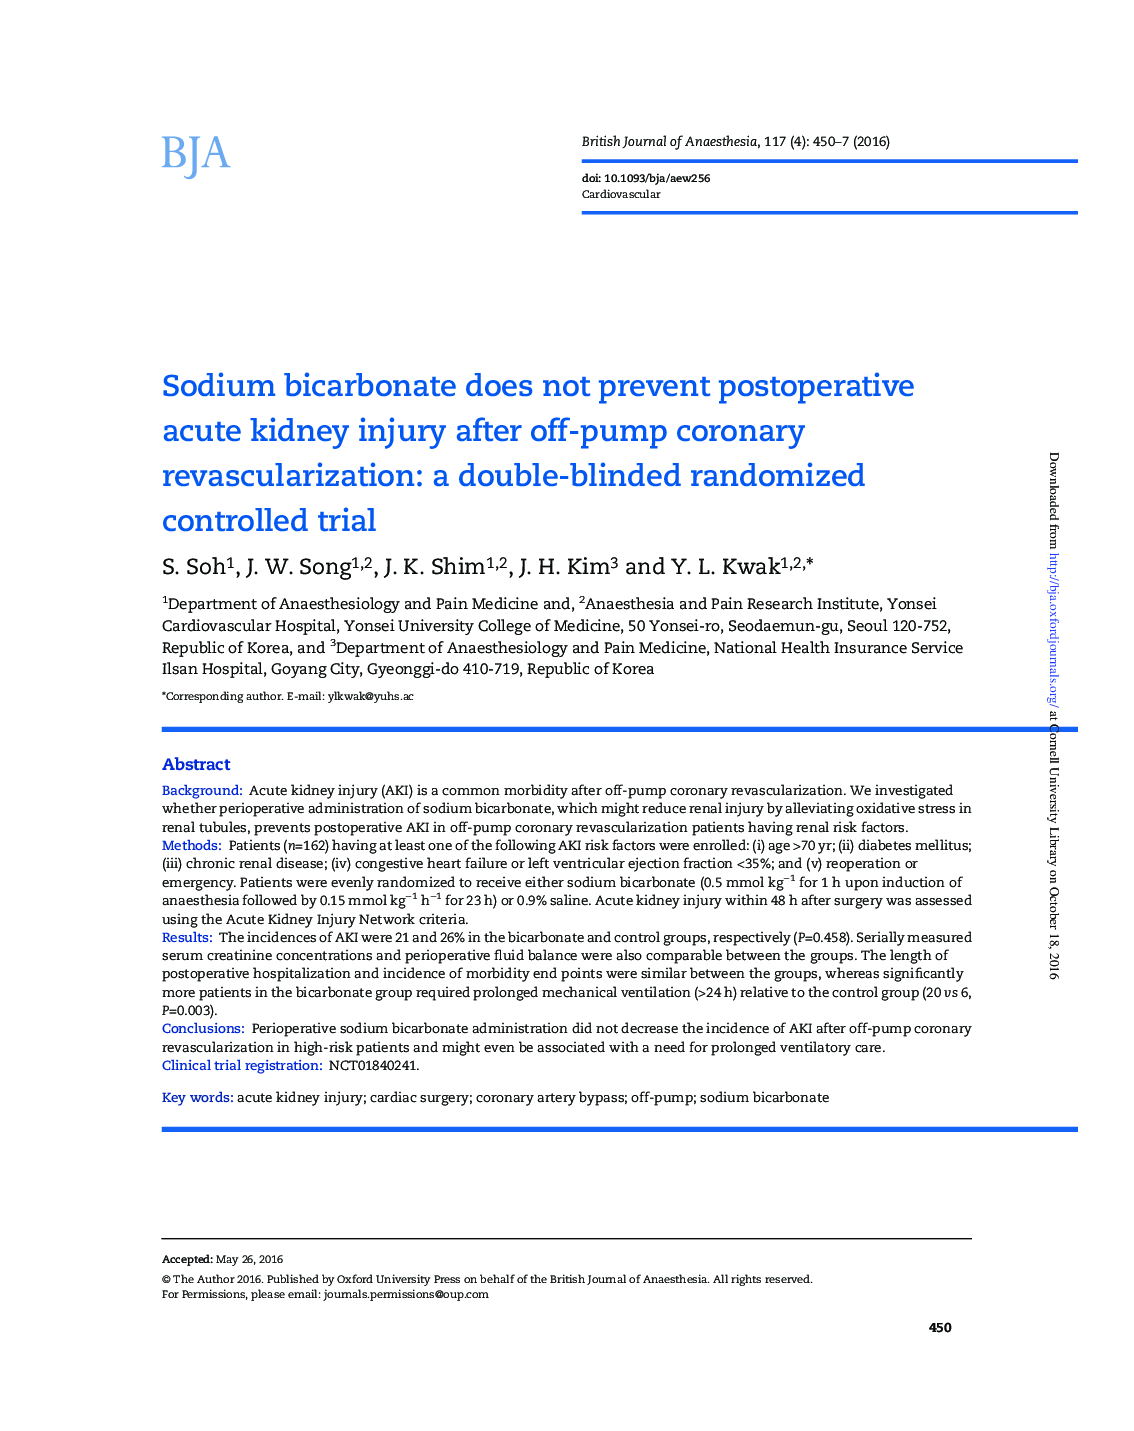 Sodium bicarbonate does not prevent postoperative acute kidney injury after off-pump coronary revascularization: a double-blinded randomized controlled trial